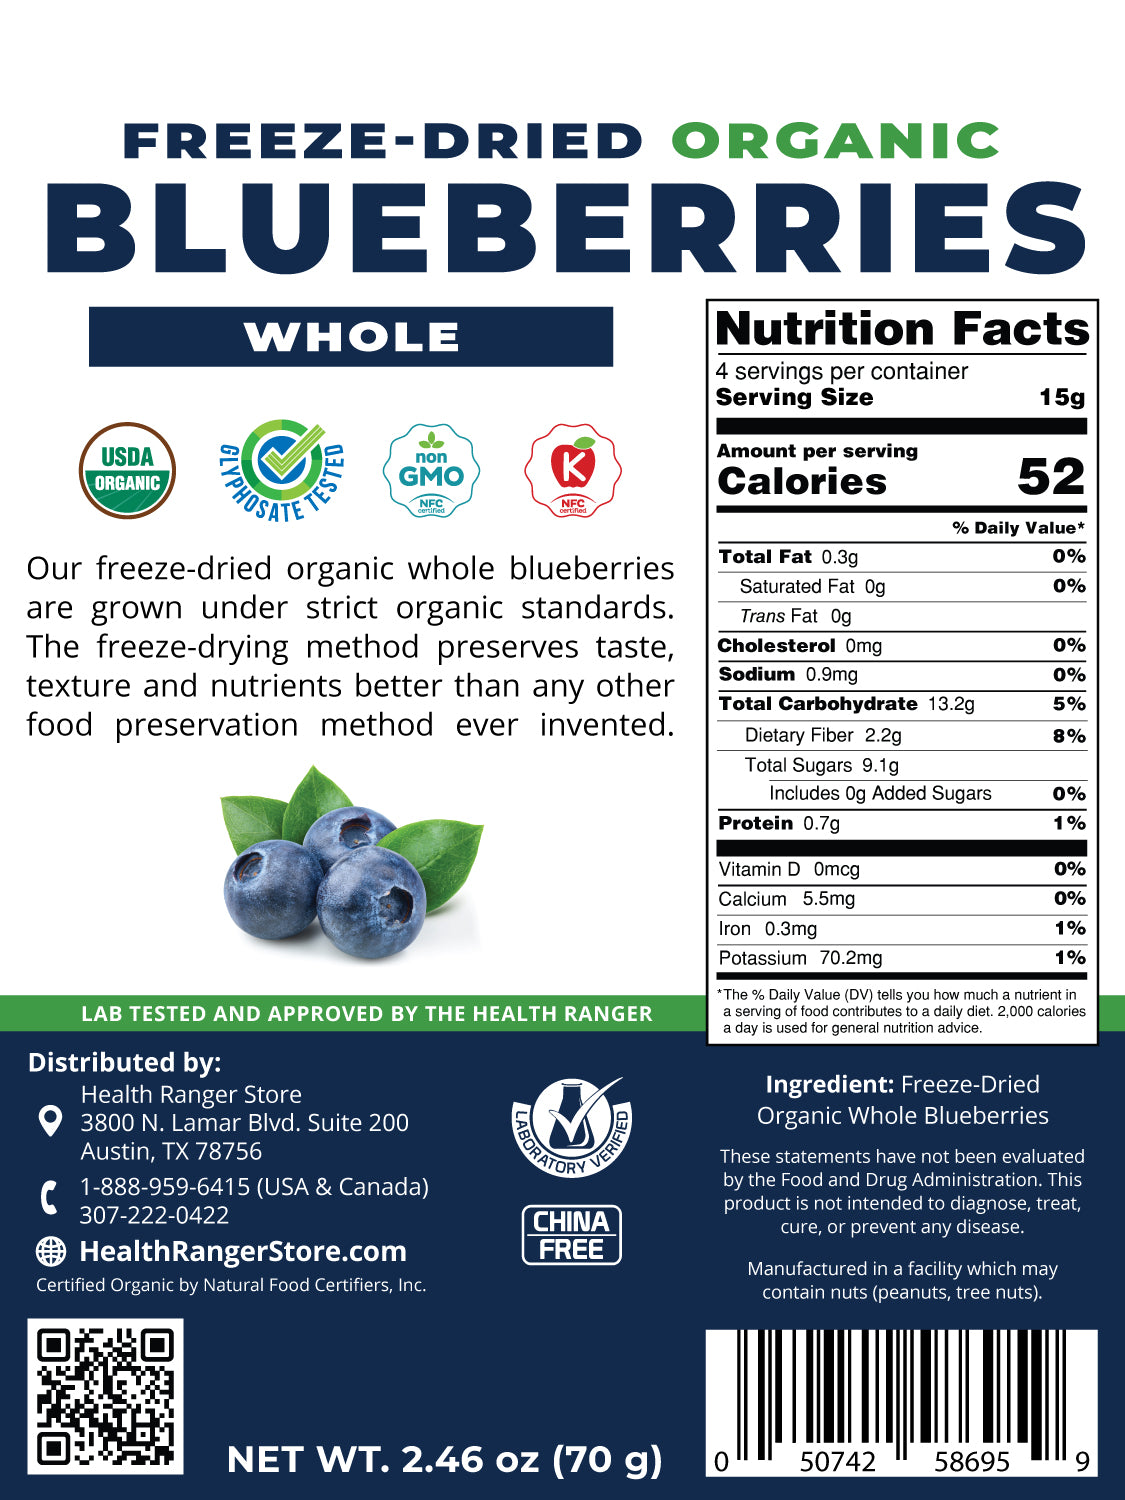 Freeze-Dried Organic Whole Blueberries 2.46 oz (70g) (3-Pack)